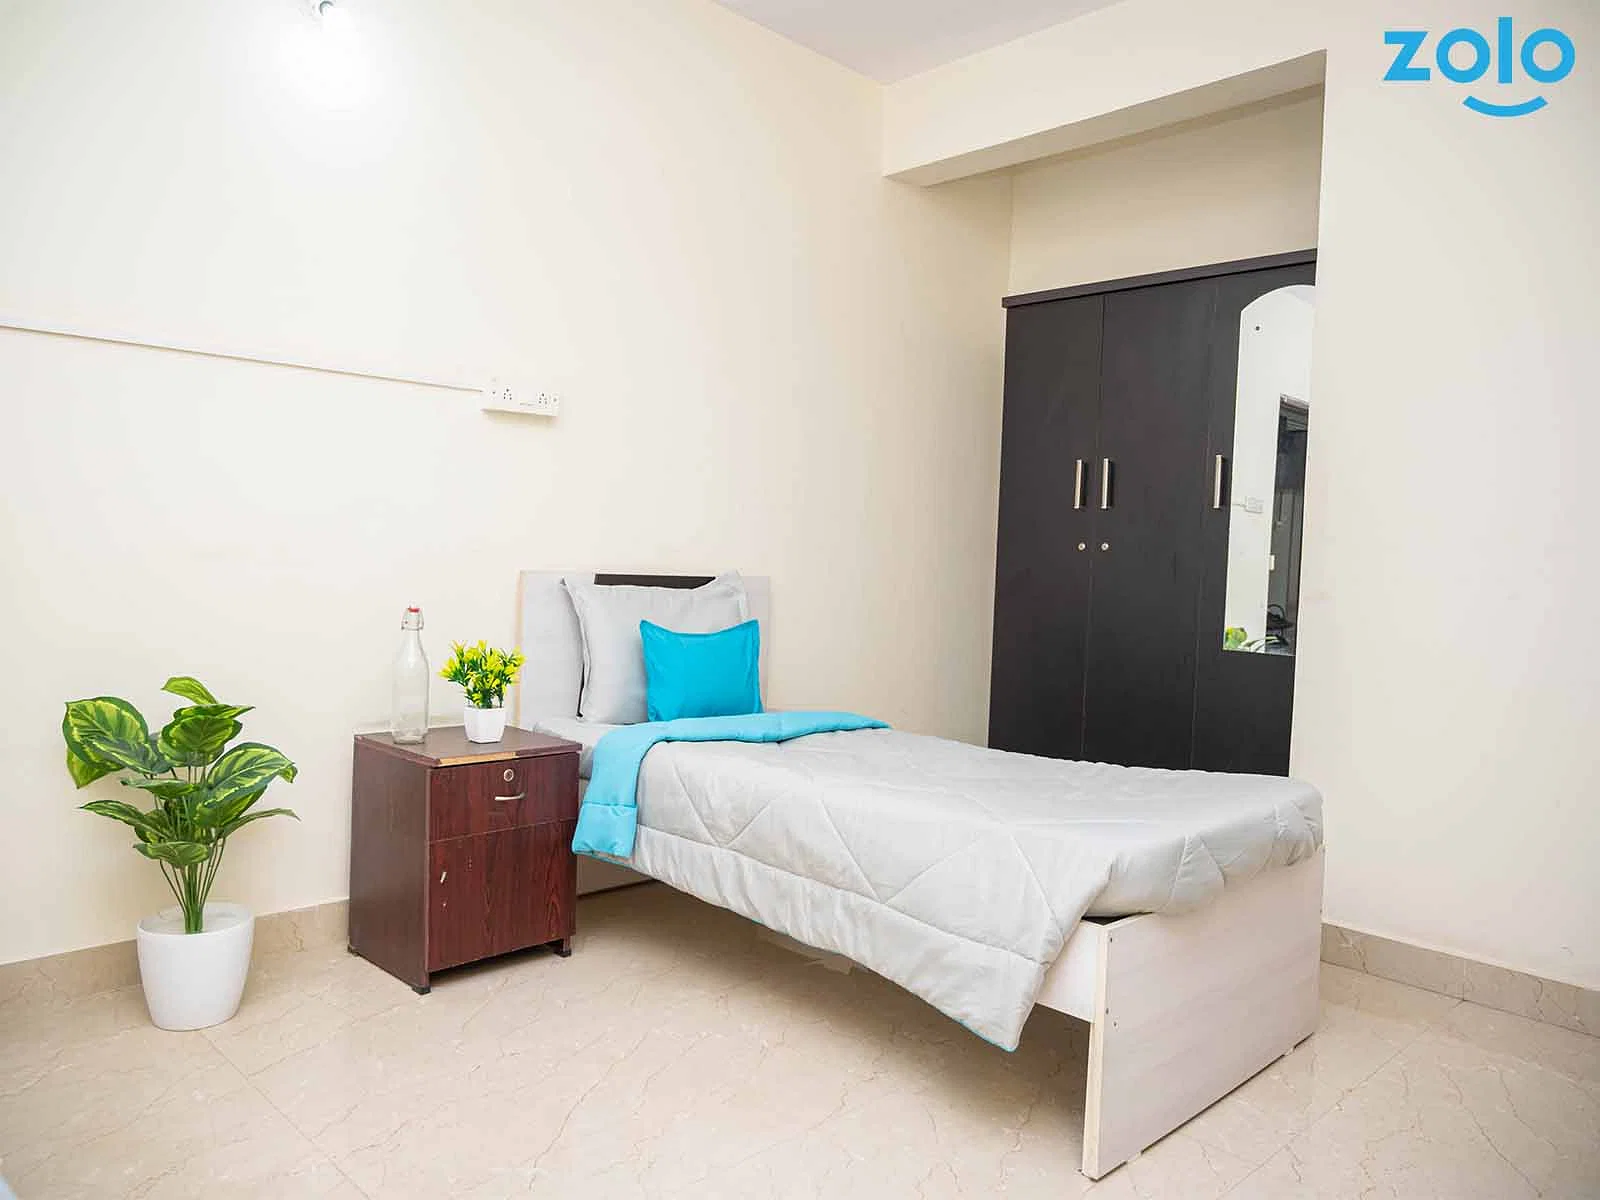 fully furnished Zolo single rooms for rent near me-check out now-Zolo Clapton